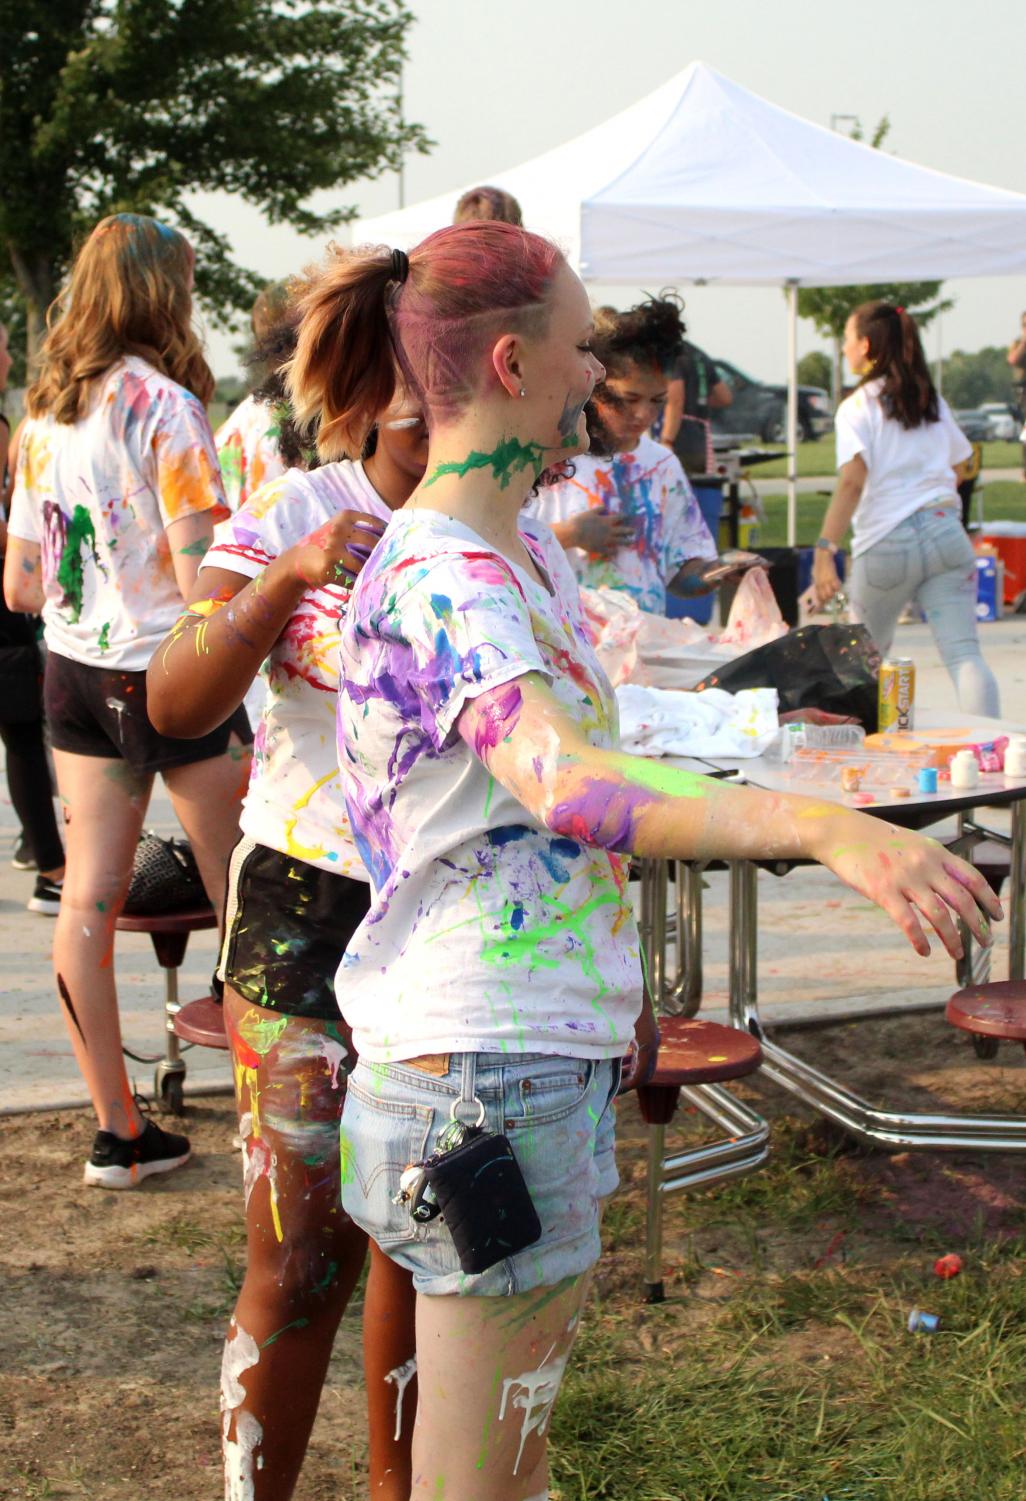 Paint Wars Take Over Pavilion – Staley News